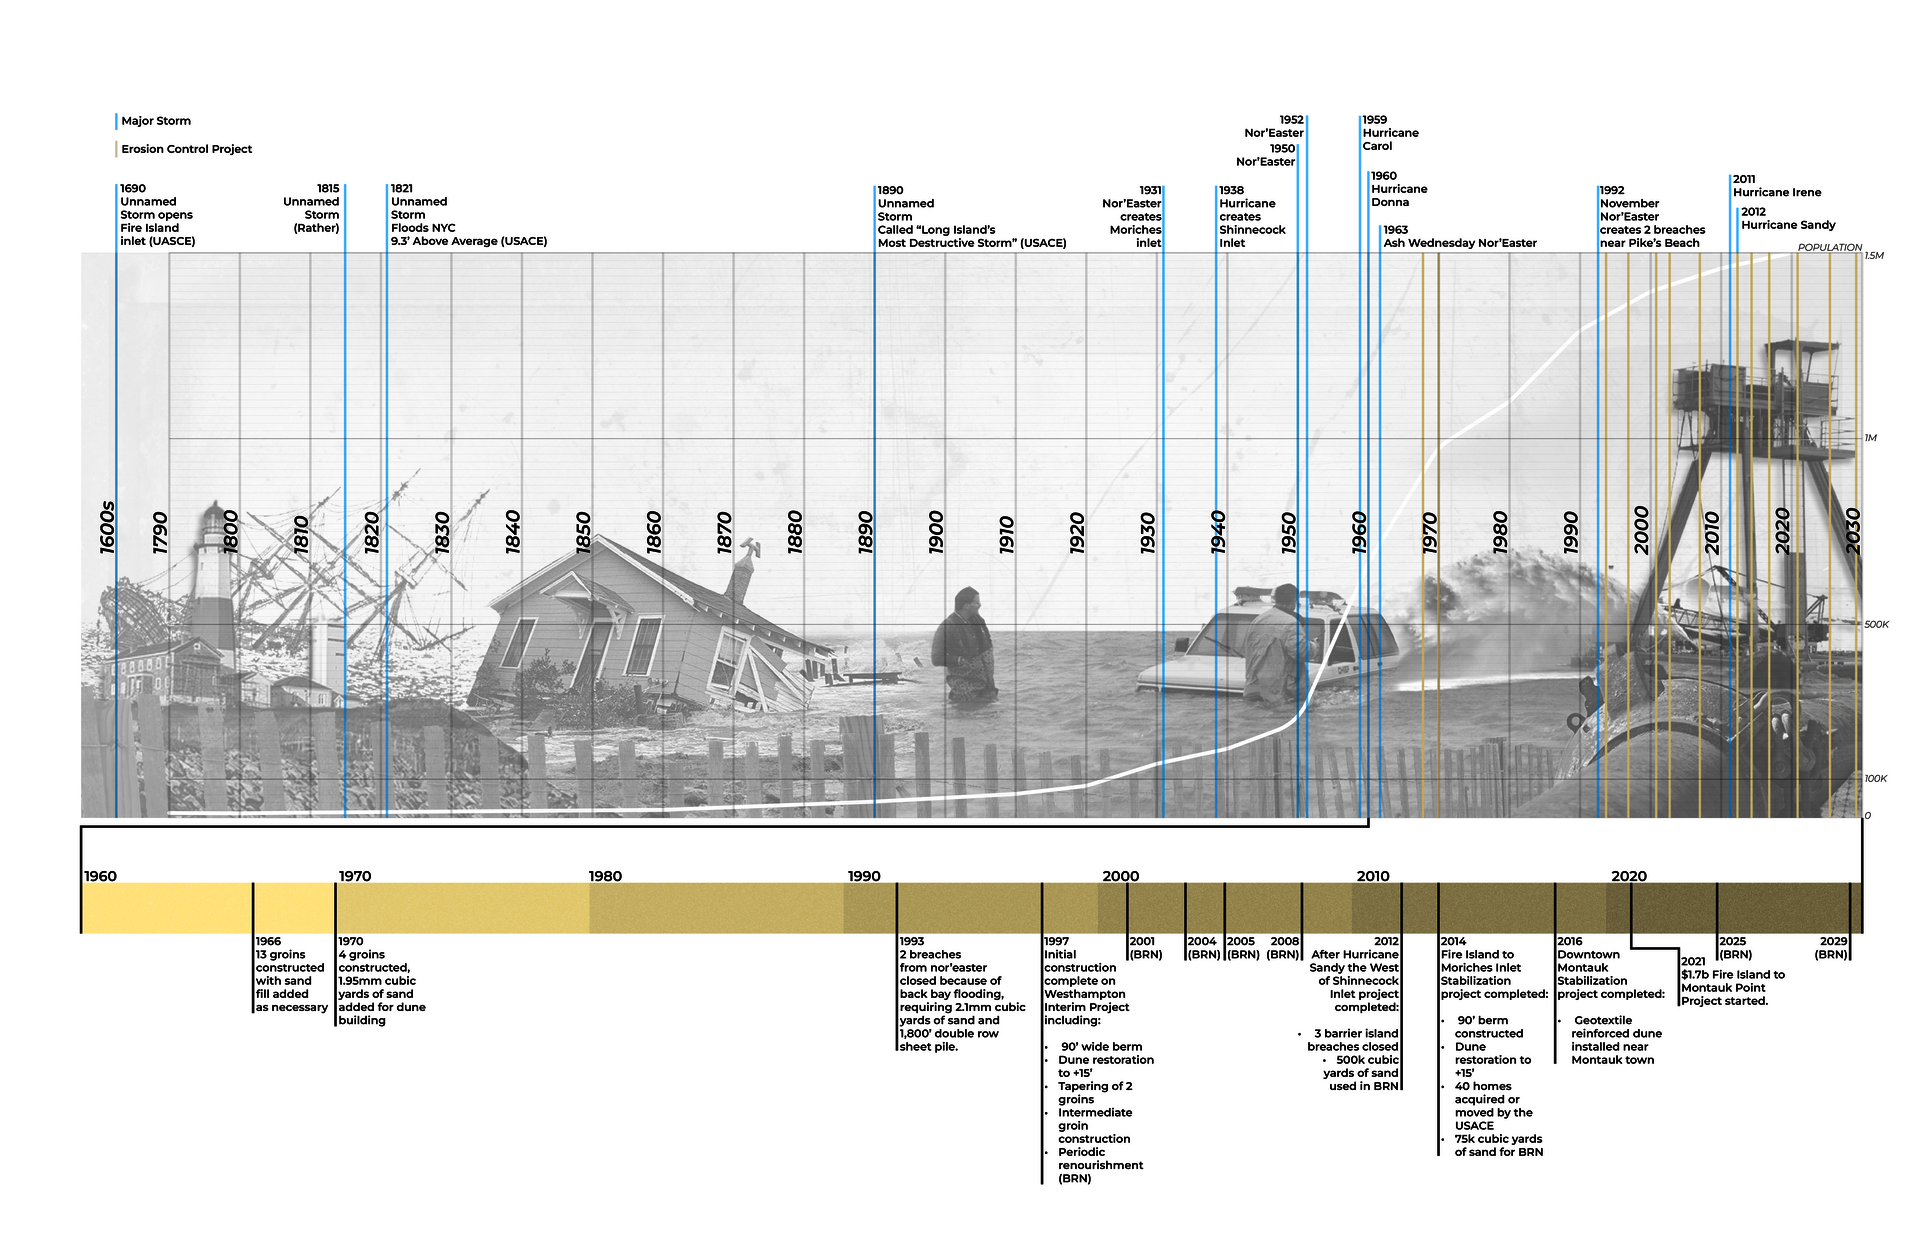 Timeline showing historic storms, erosion control projects, and population growth from the 1600s to present. Timeline and data overlaid on digital collage.